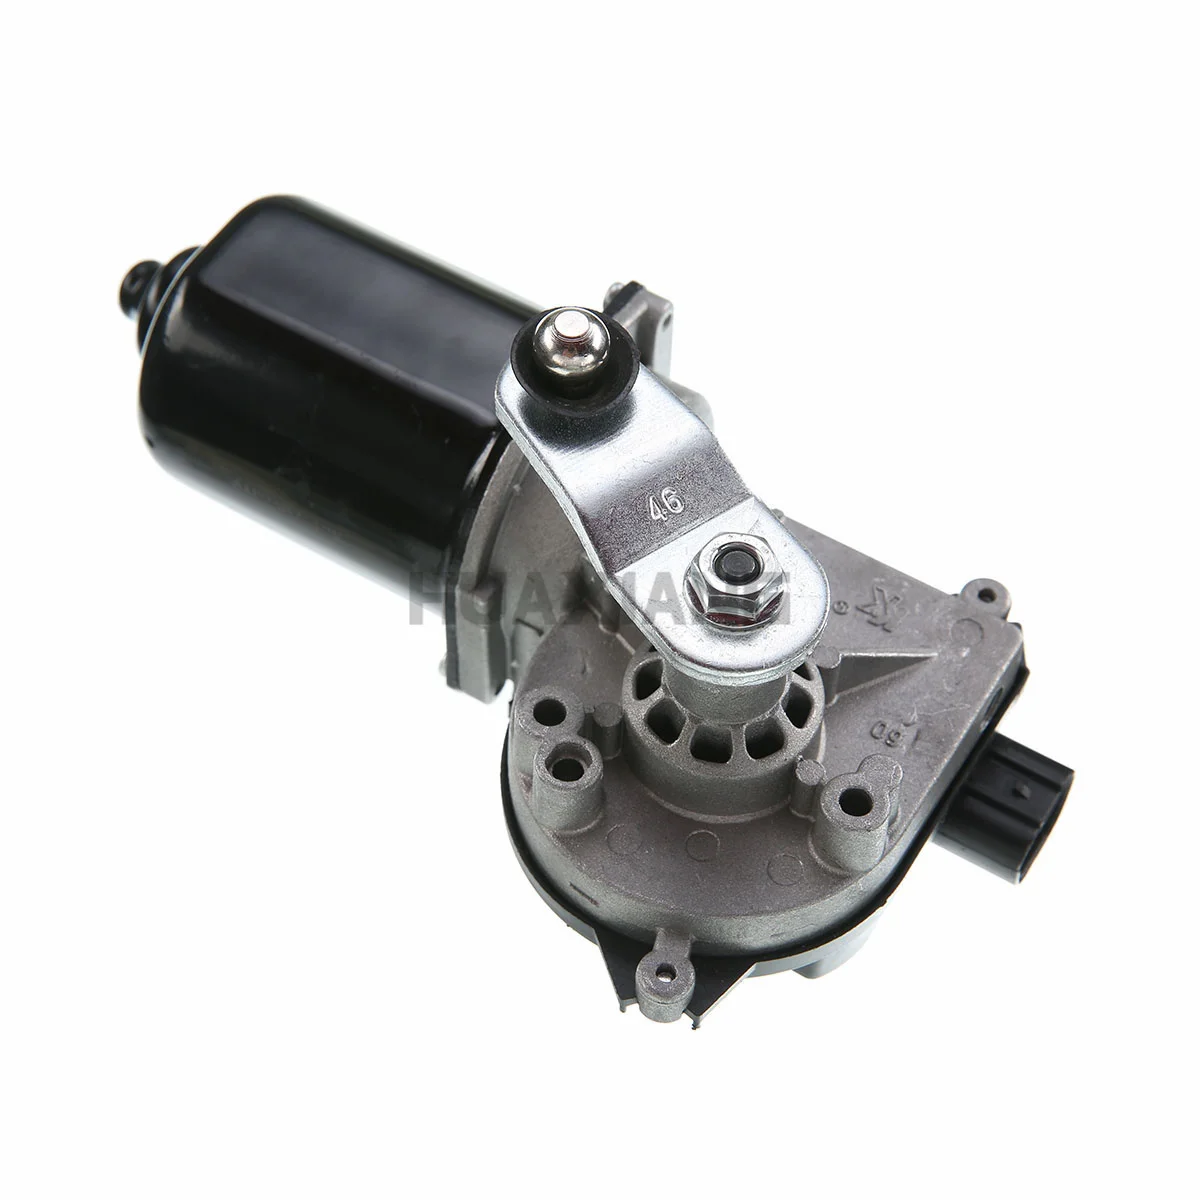 

A1 In-stock CN US CA New Front Windshield Wiper Motor for Toyota Avalon 2000-2005 43-2036 85110-07030 8511007030 Automobile